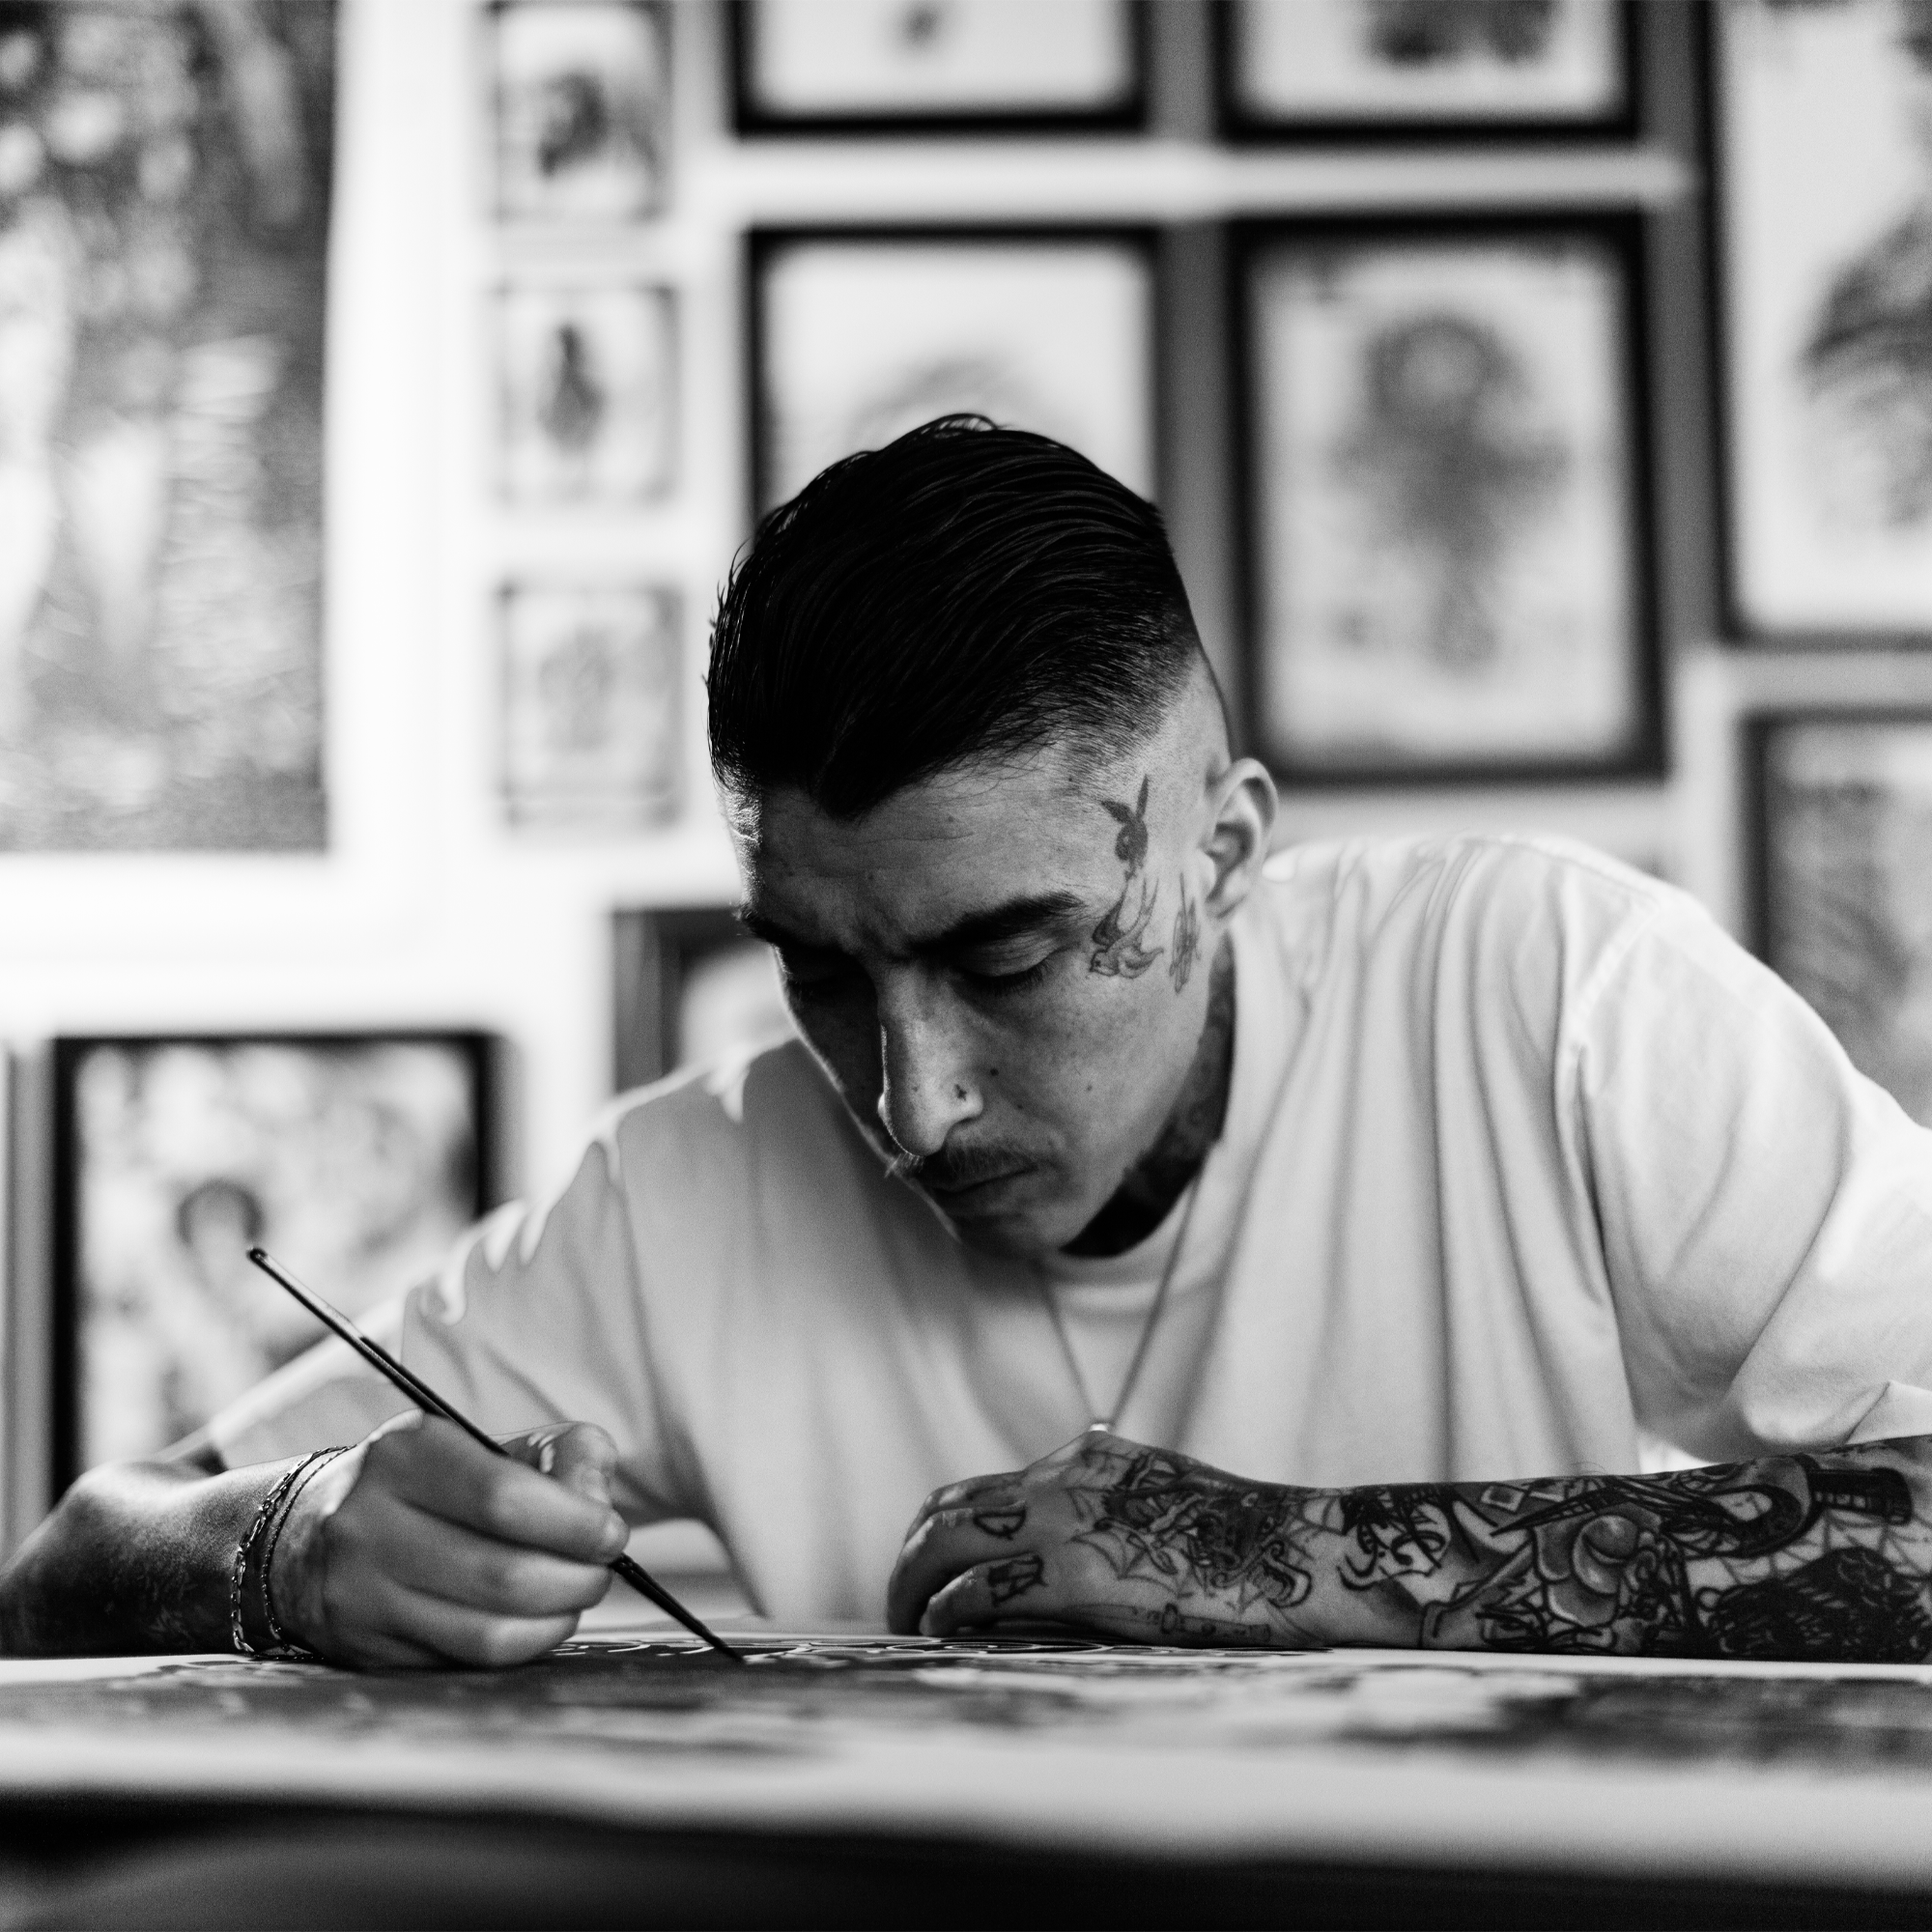 Fabian is an Auckland tattooist at Three Dice Tattoo specialising in Western traditional tattooing